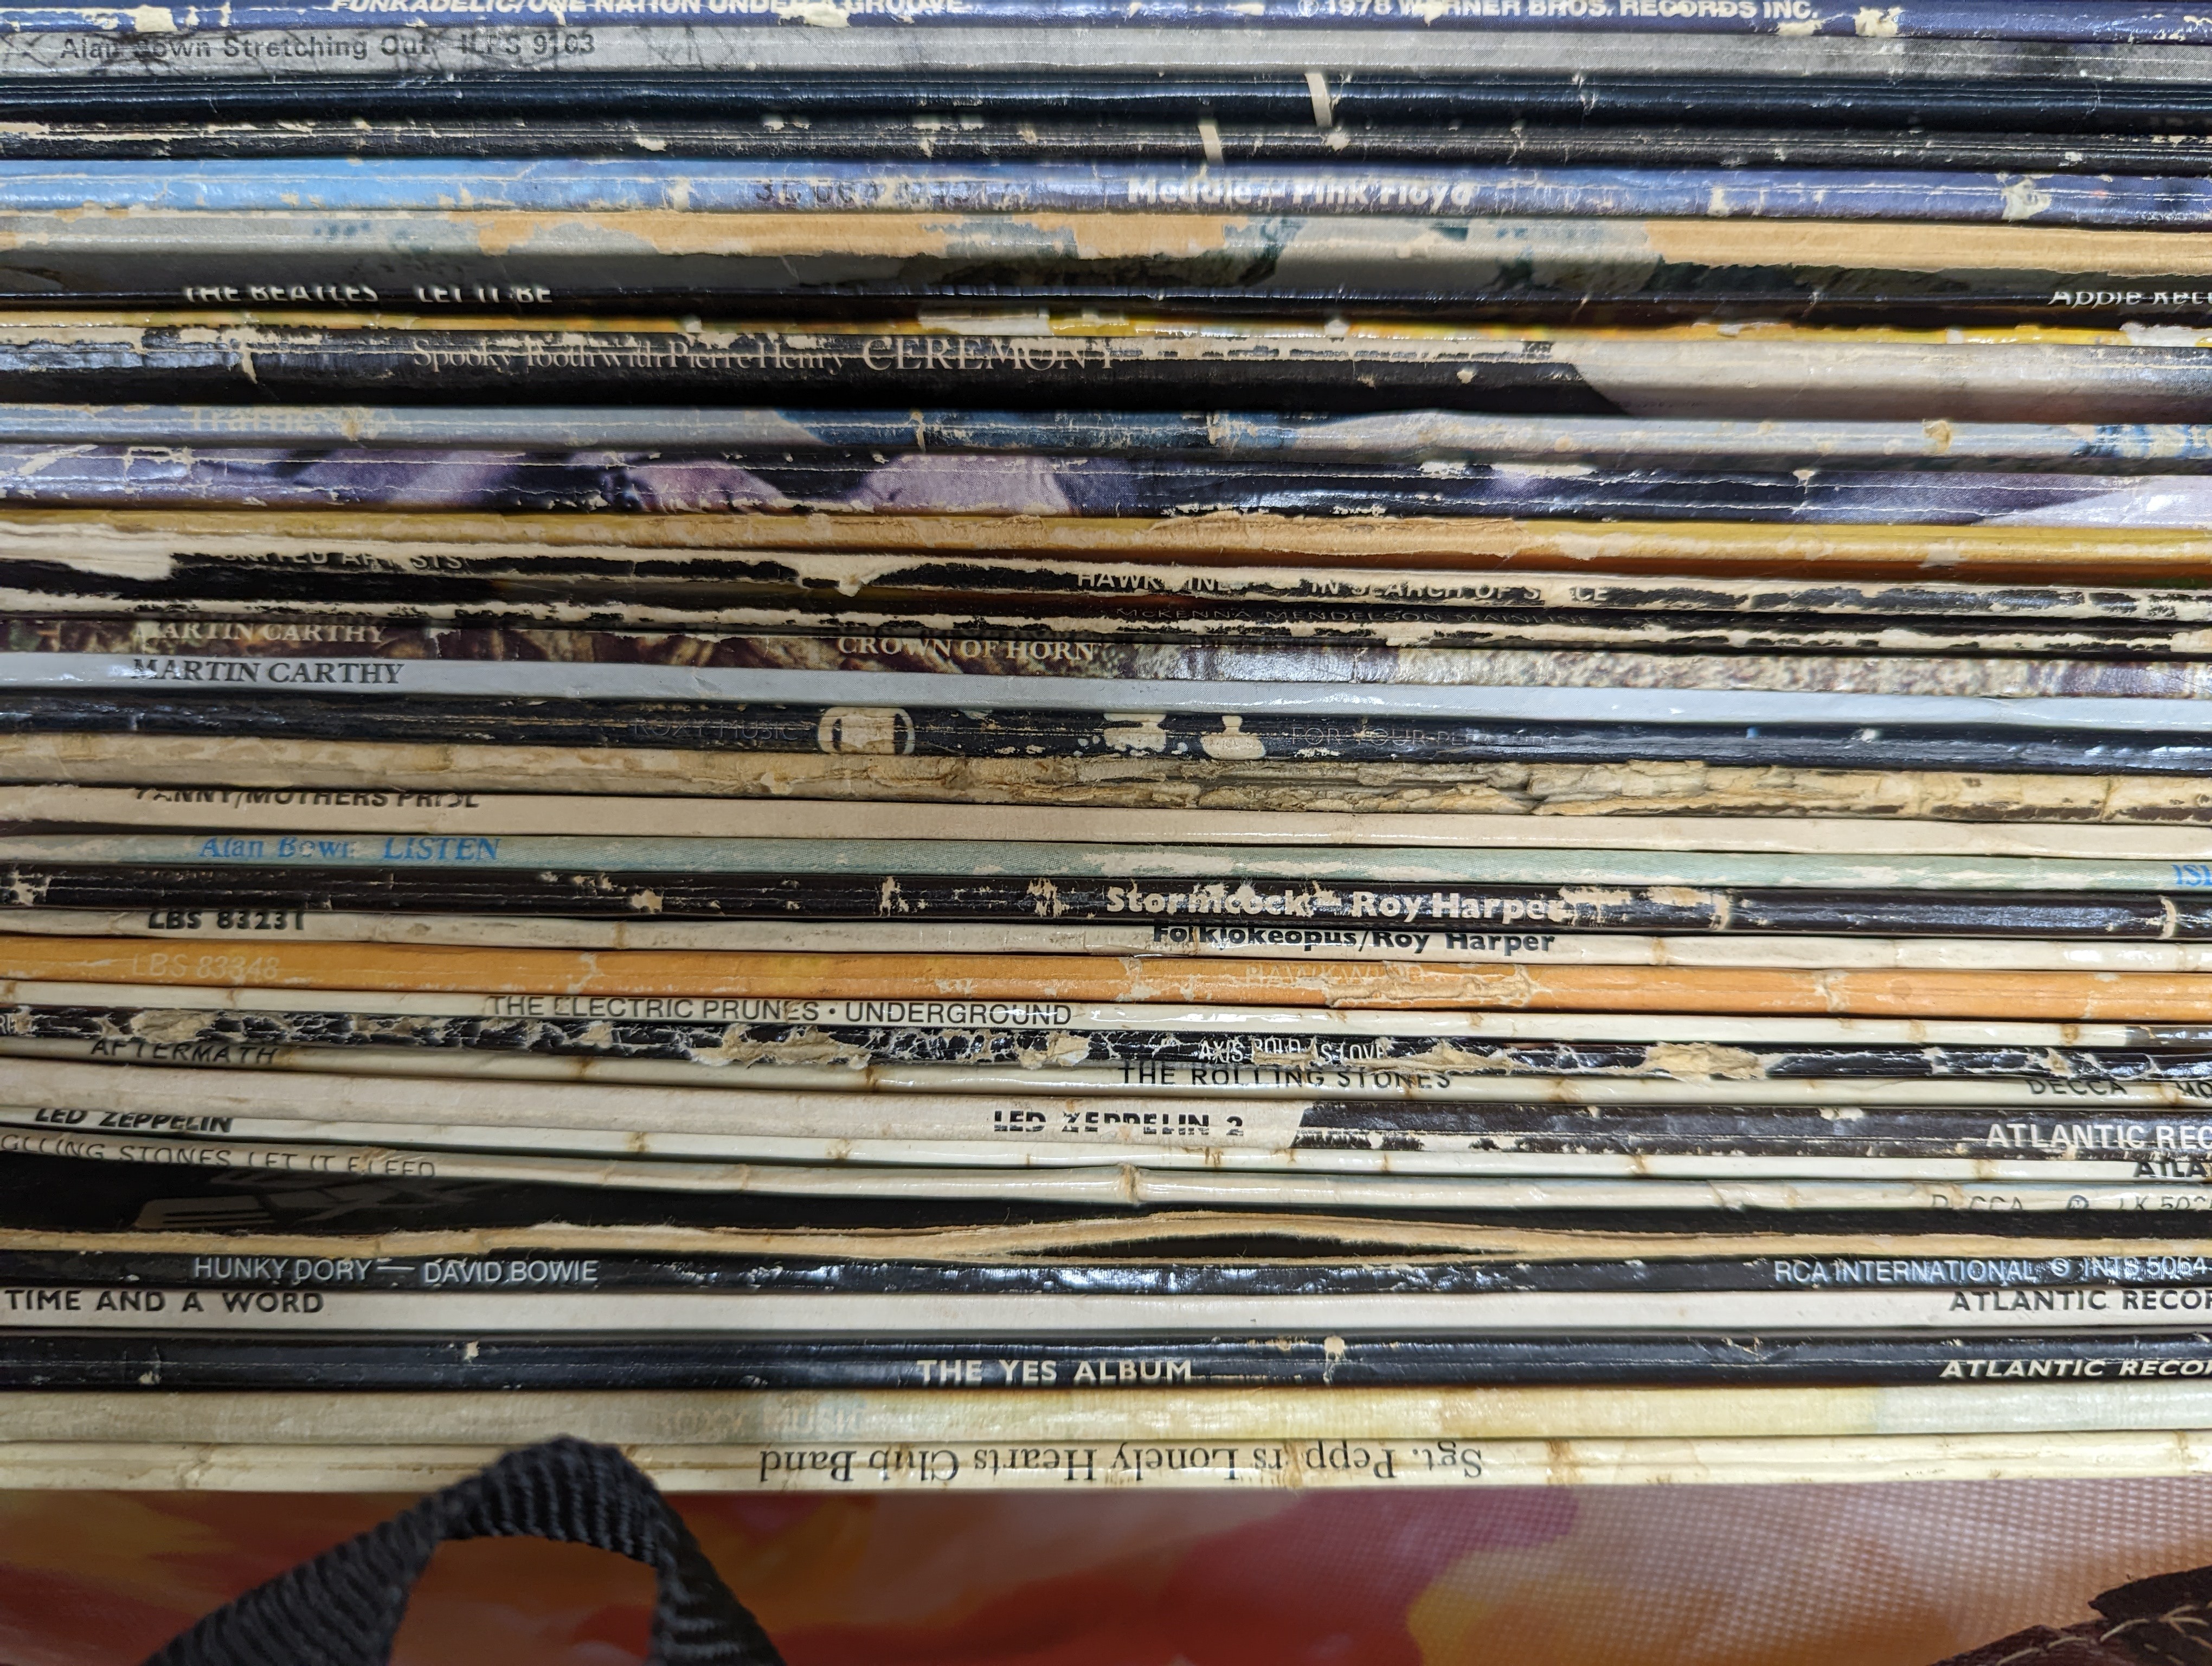 Mixed 1970's records, the Beatles, David Bowie, the Rolling Stones, Pink Floyd, Led Zeppelin etc.